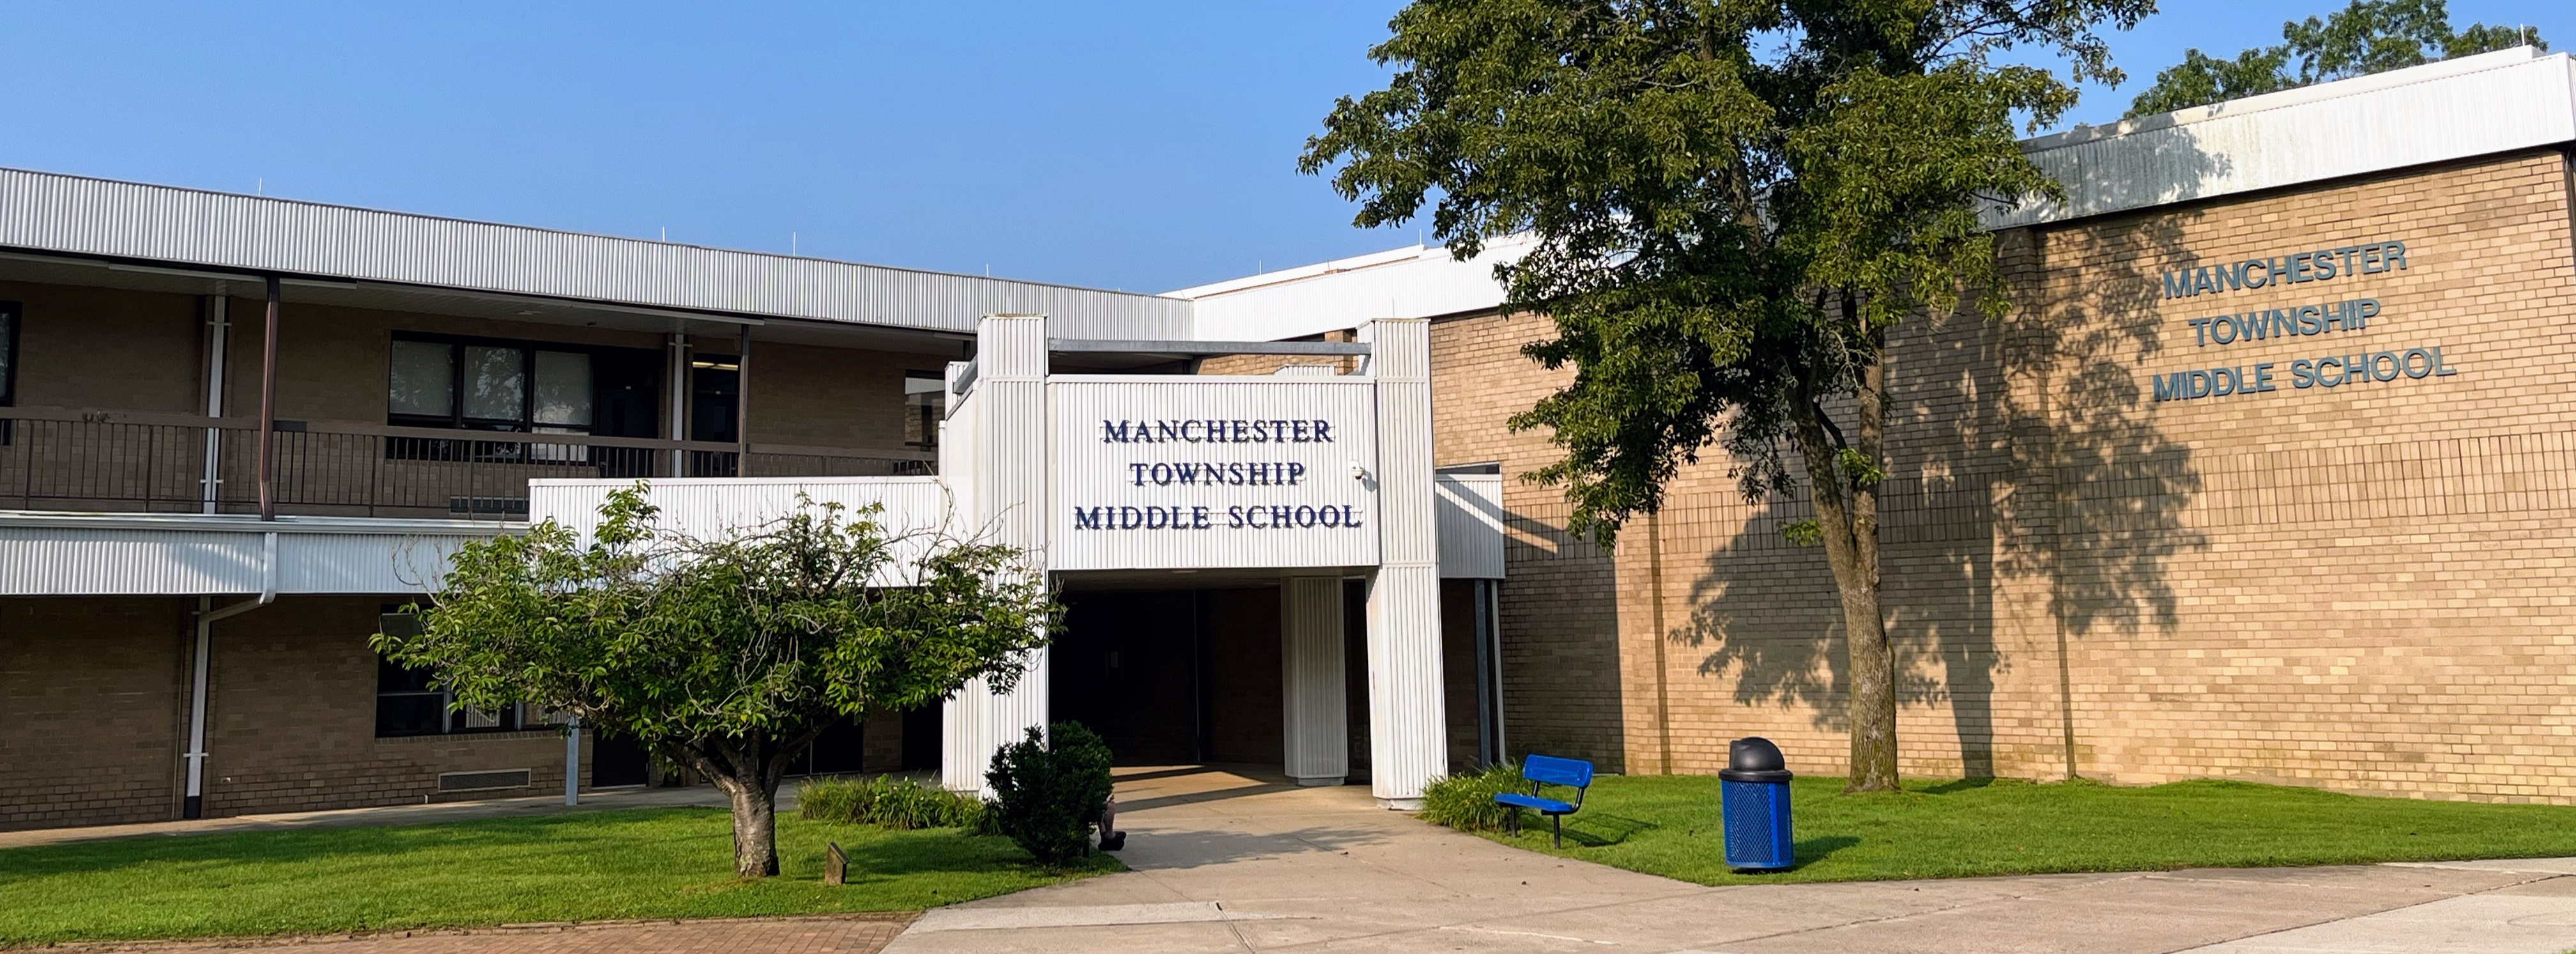 Manchester Township Middle School Exterior